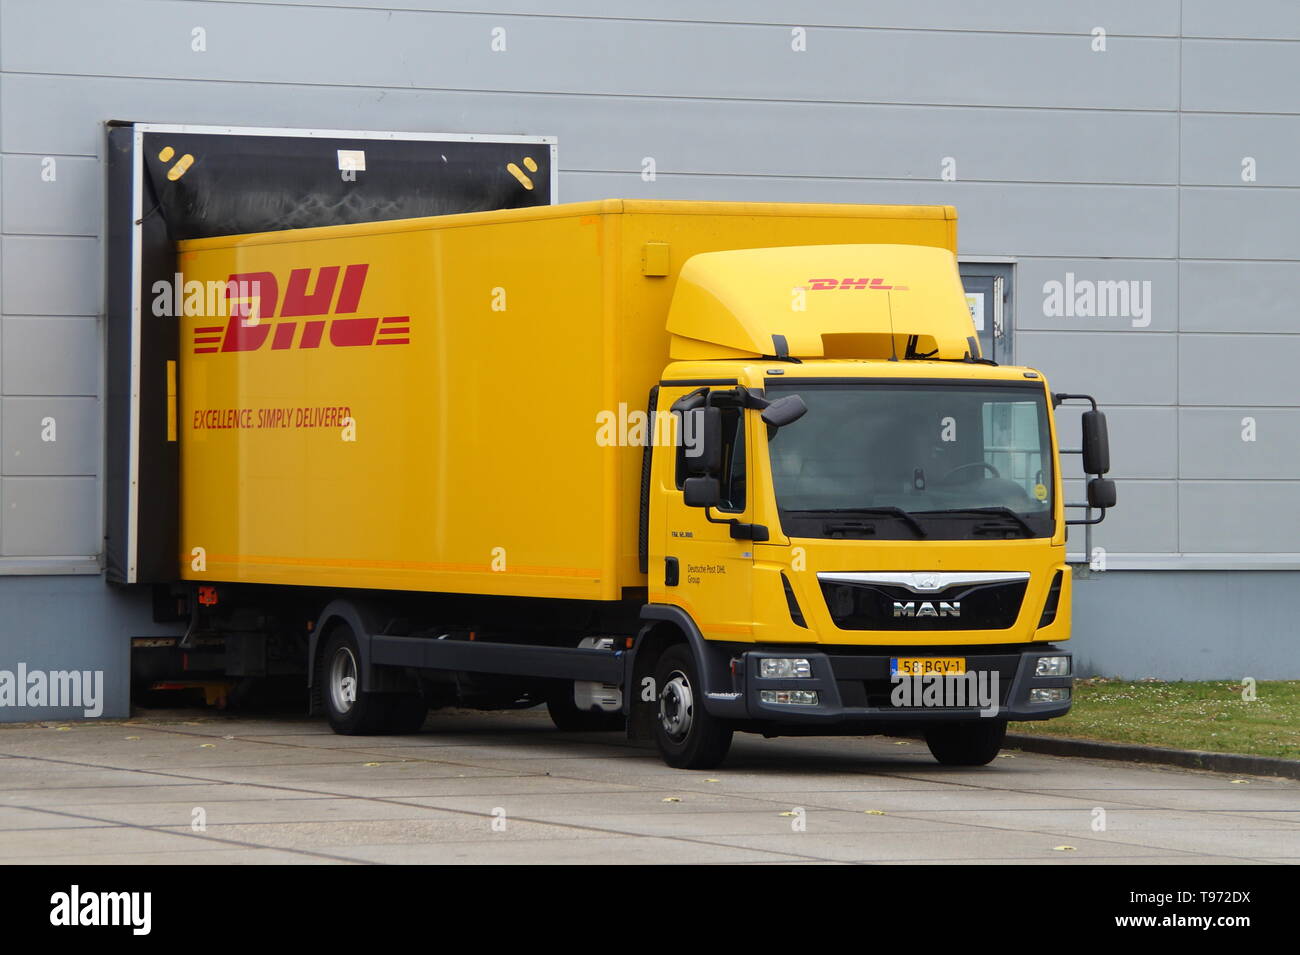 Almere, the Netherlands - May 24, 2017: DHL delivery truck at a loading dock. Nobody in de vehicle. Stock Photo